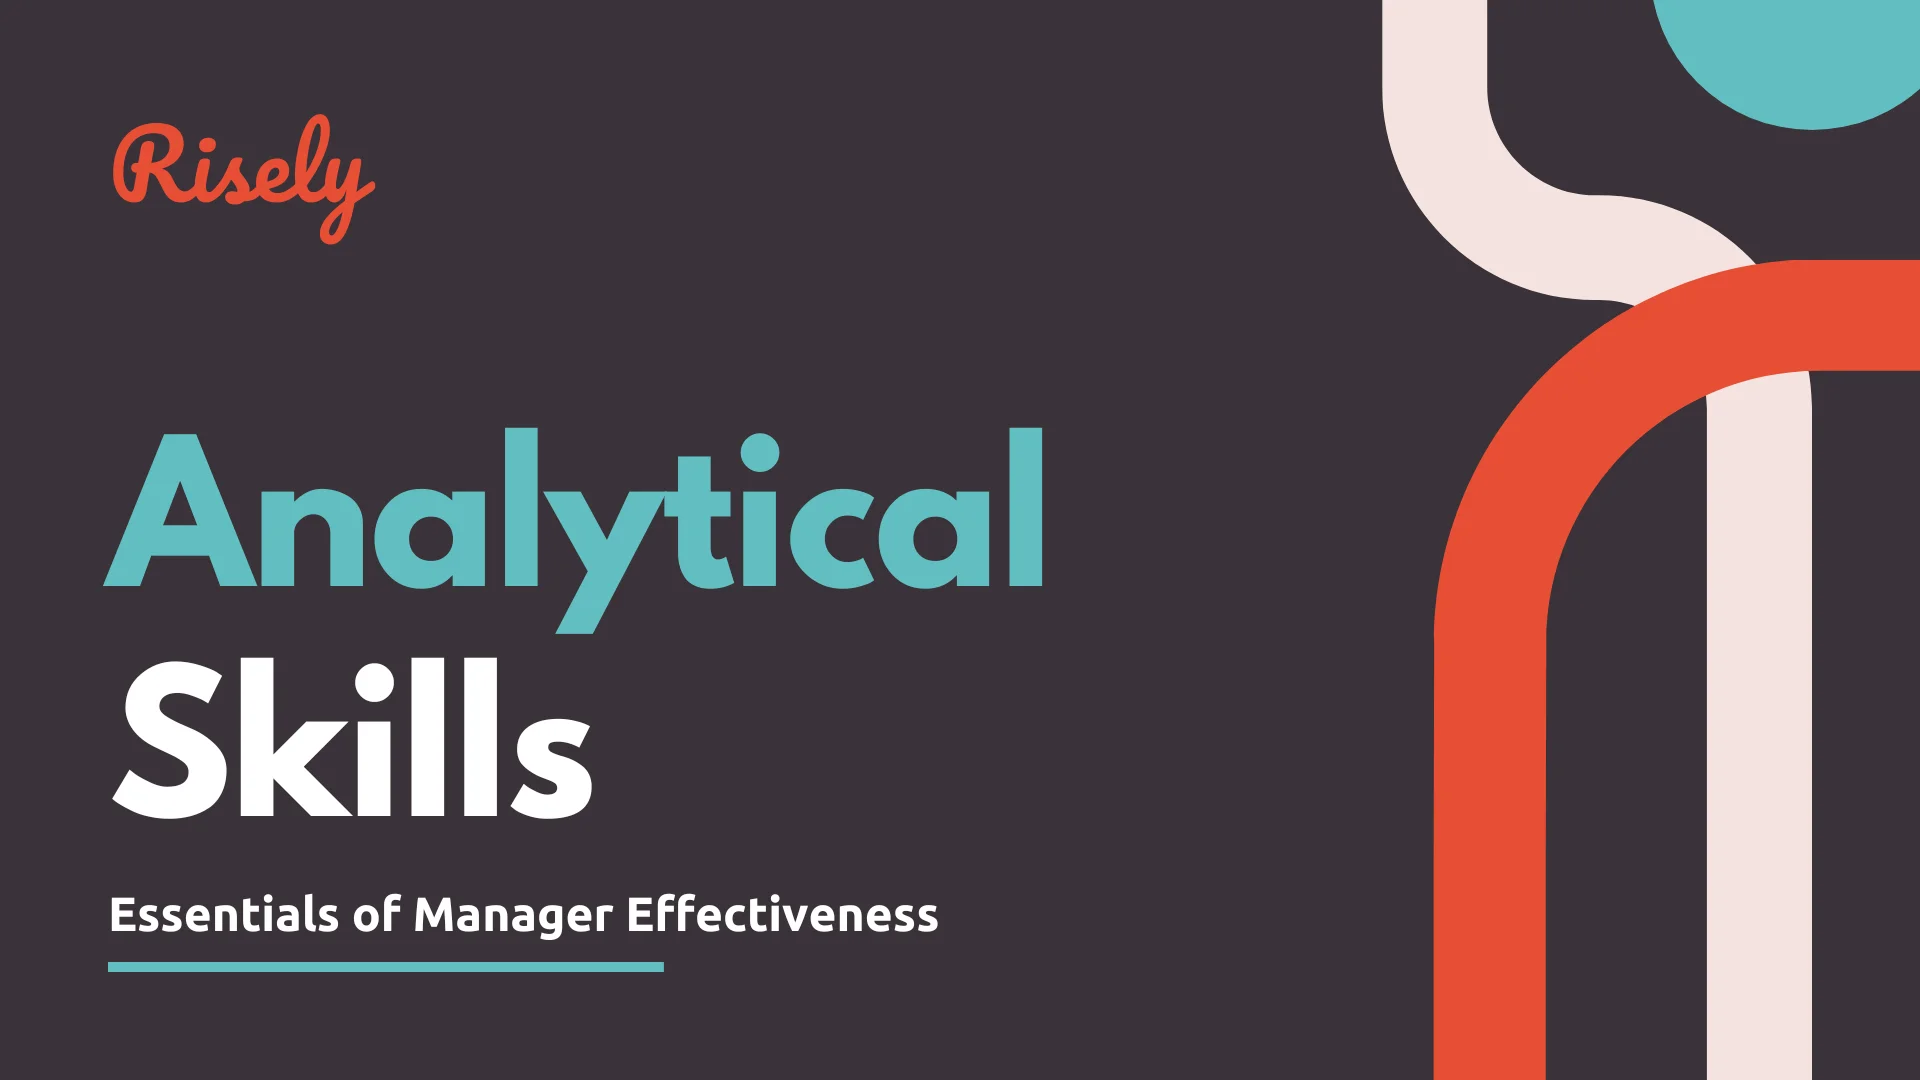 How To Improve Analytical Skills As A Manager?